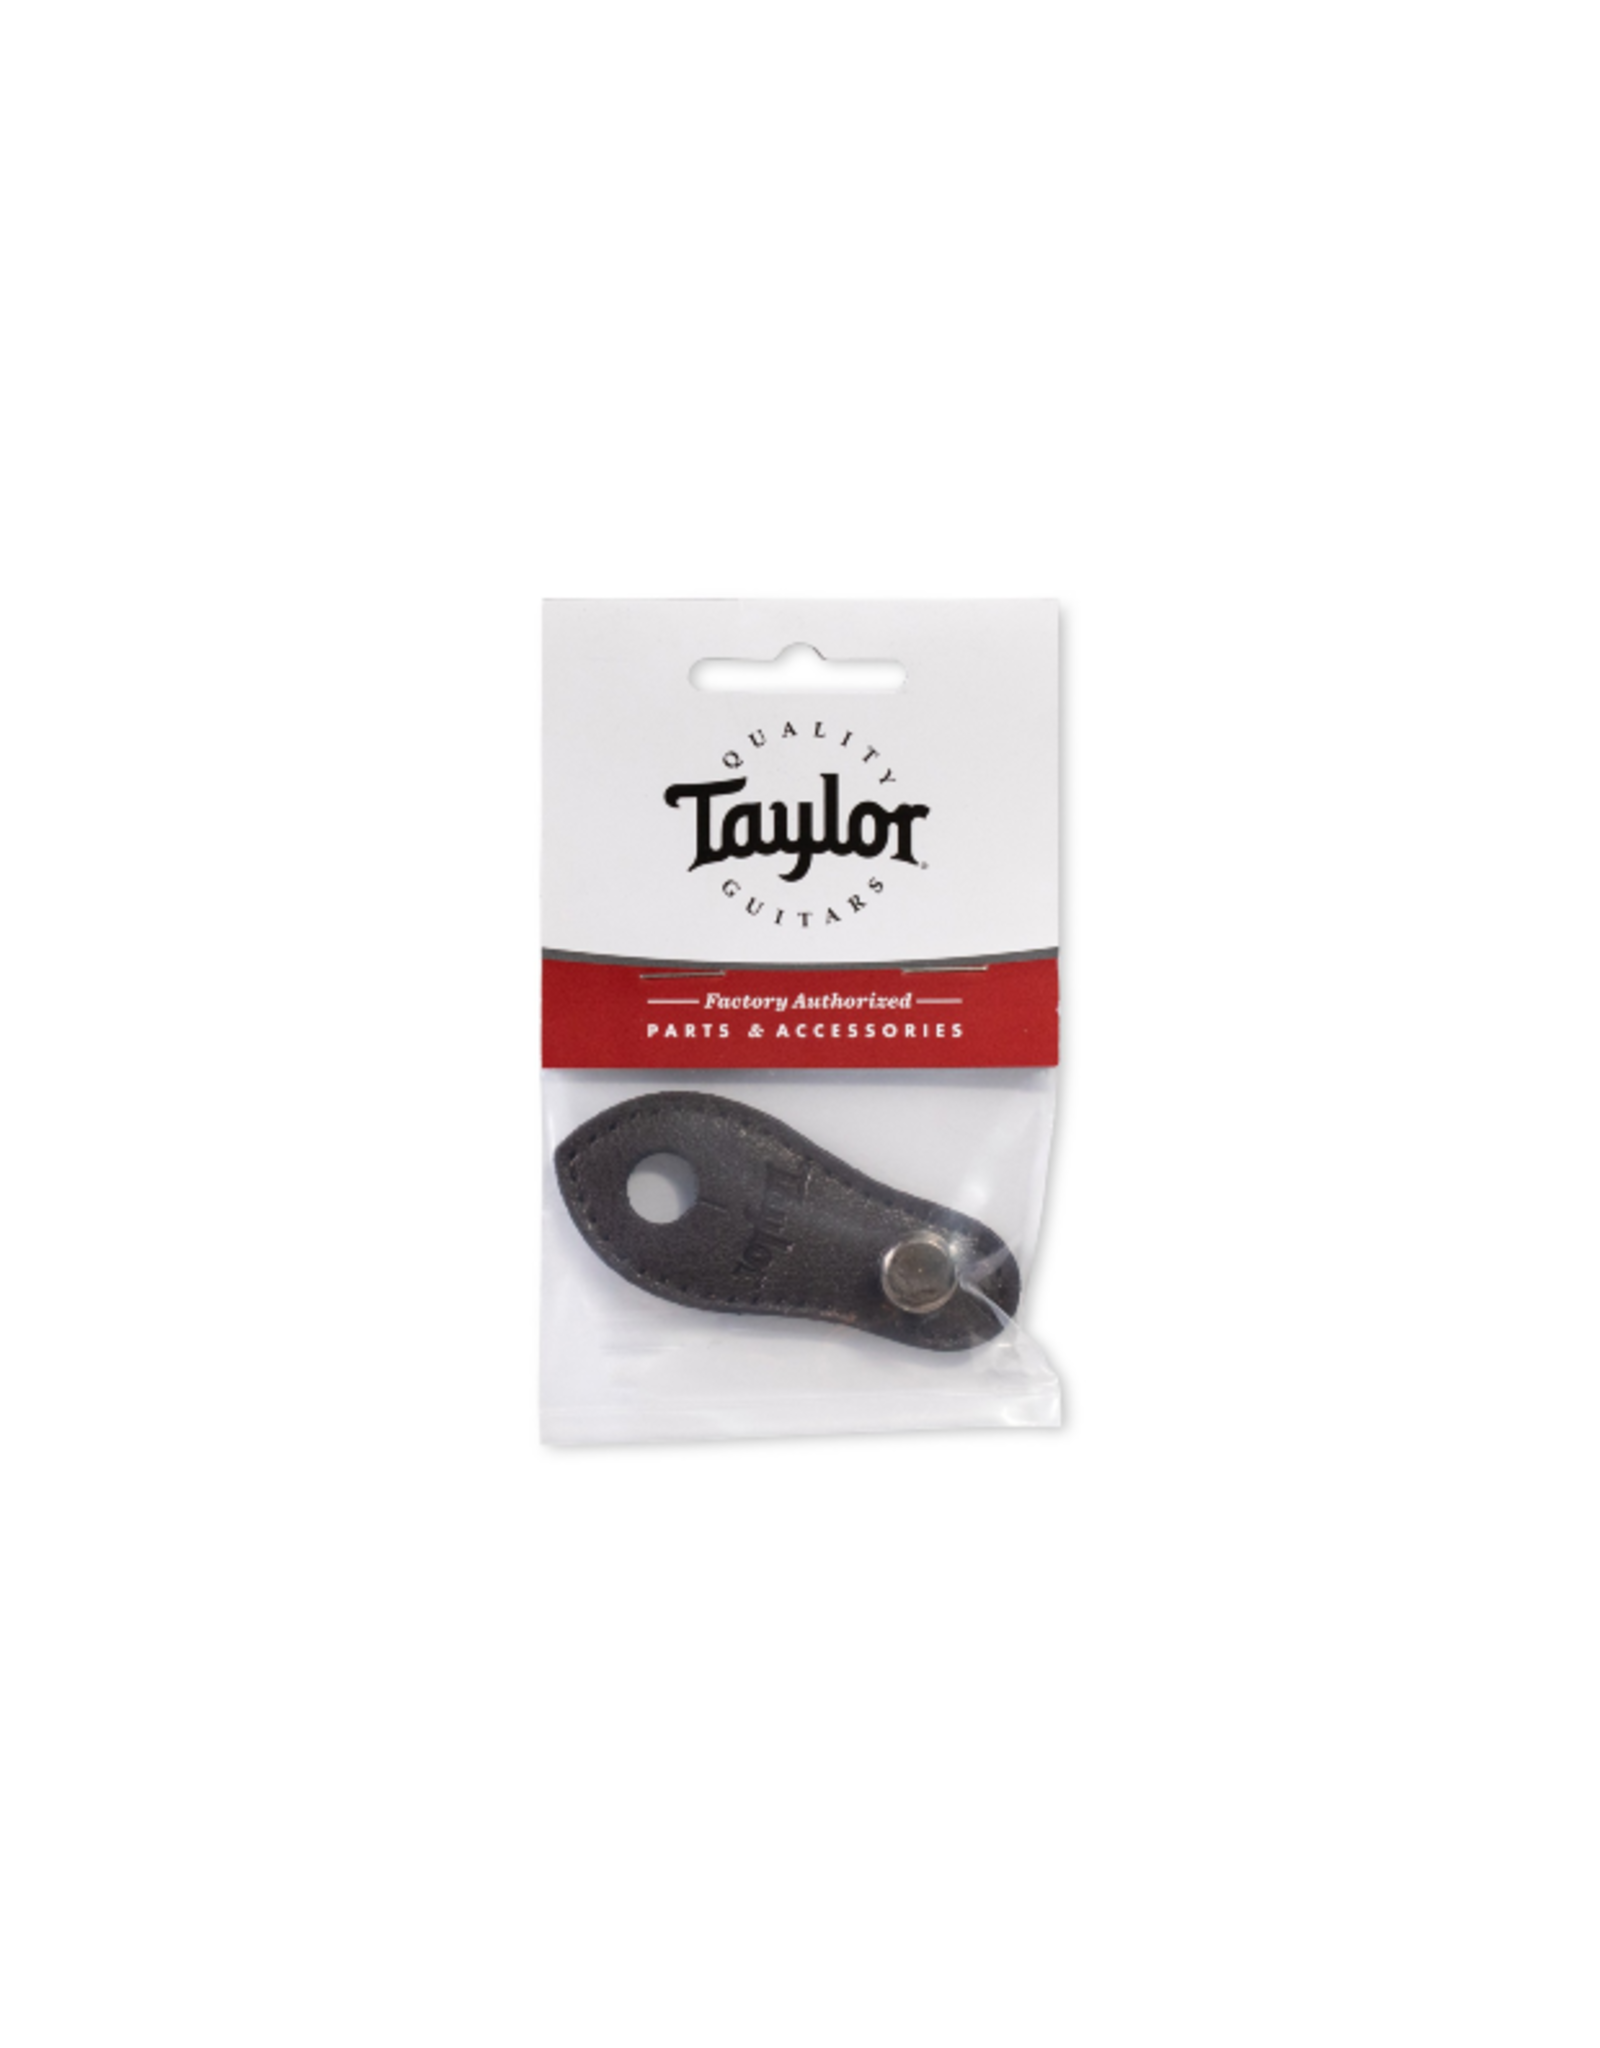 Taylor Guitars Taylor Leather StrapLink Output Jack Adapter, Chocolate Brown